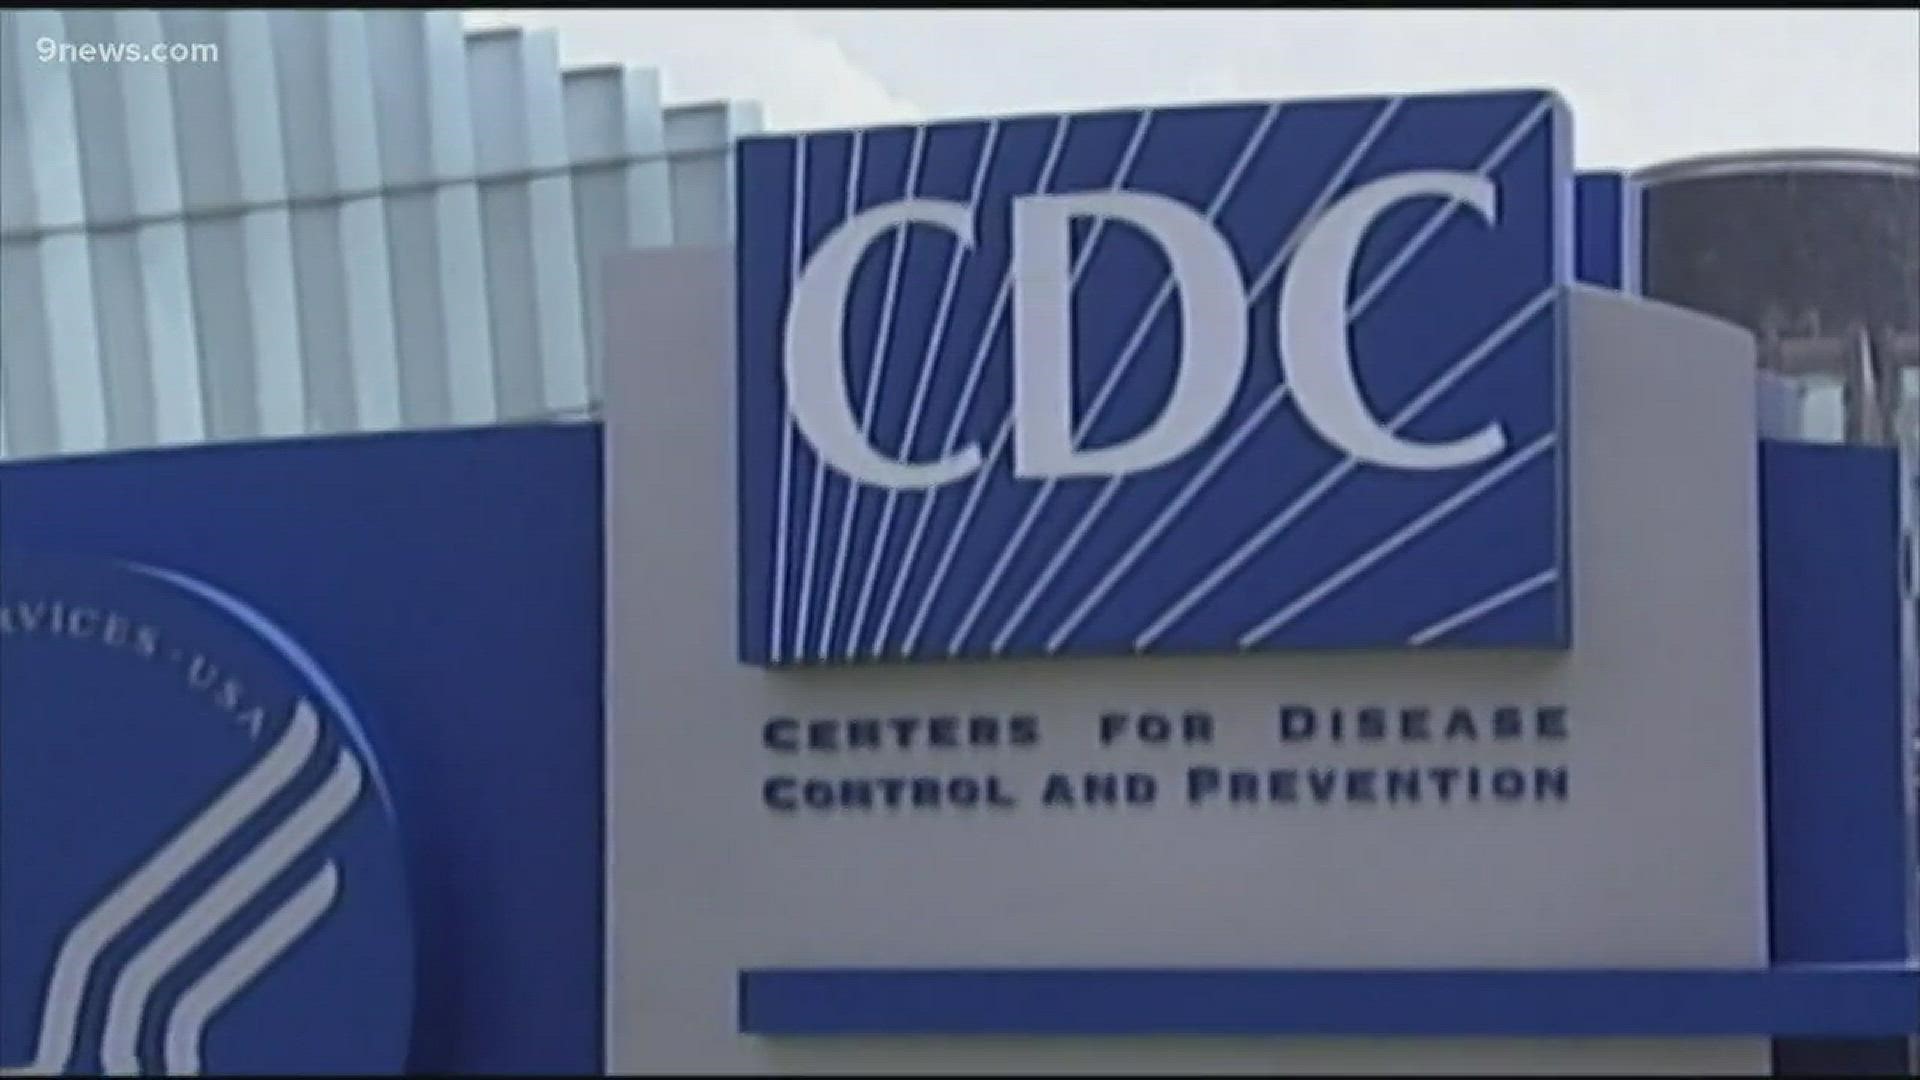 The state health department confirmed that a child died from the flu in the Denver metro area within the last week.